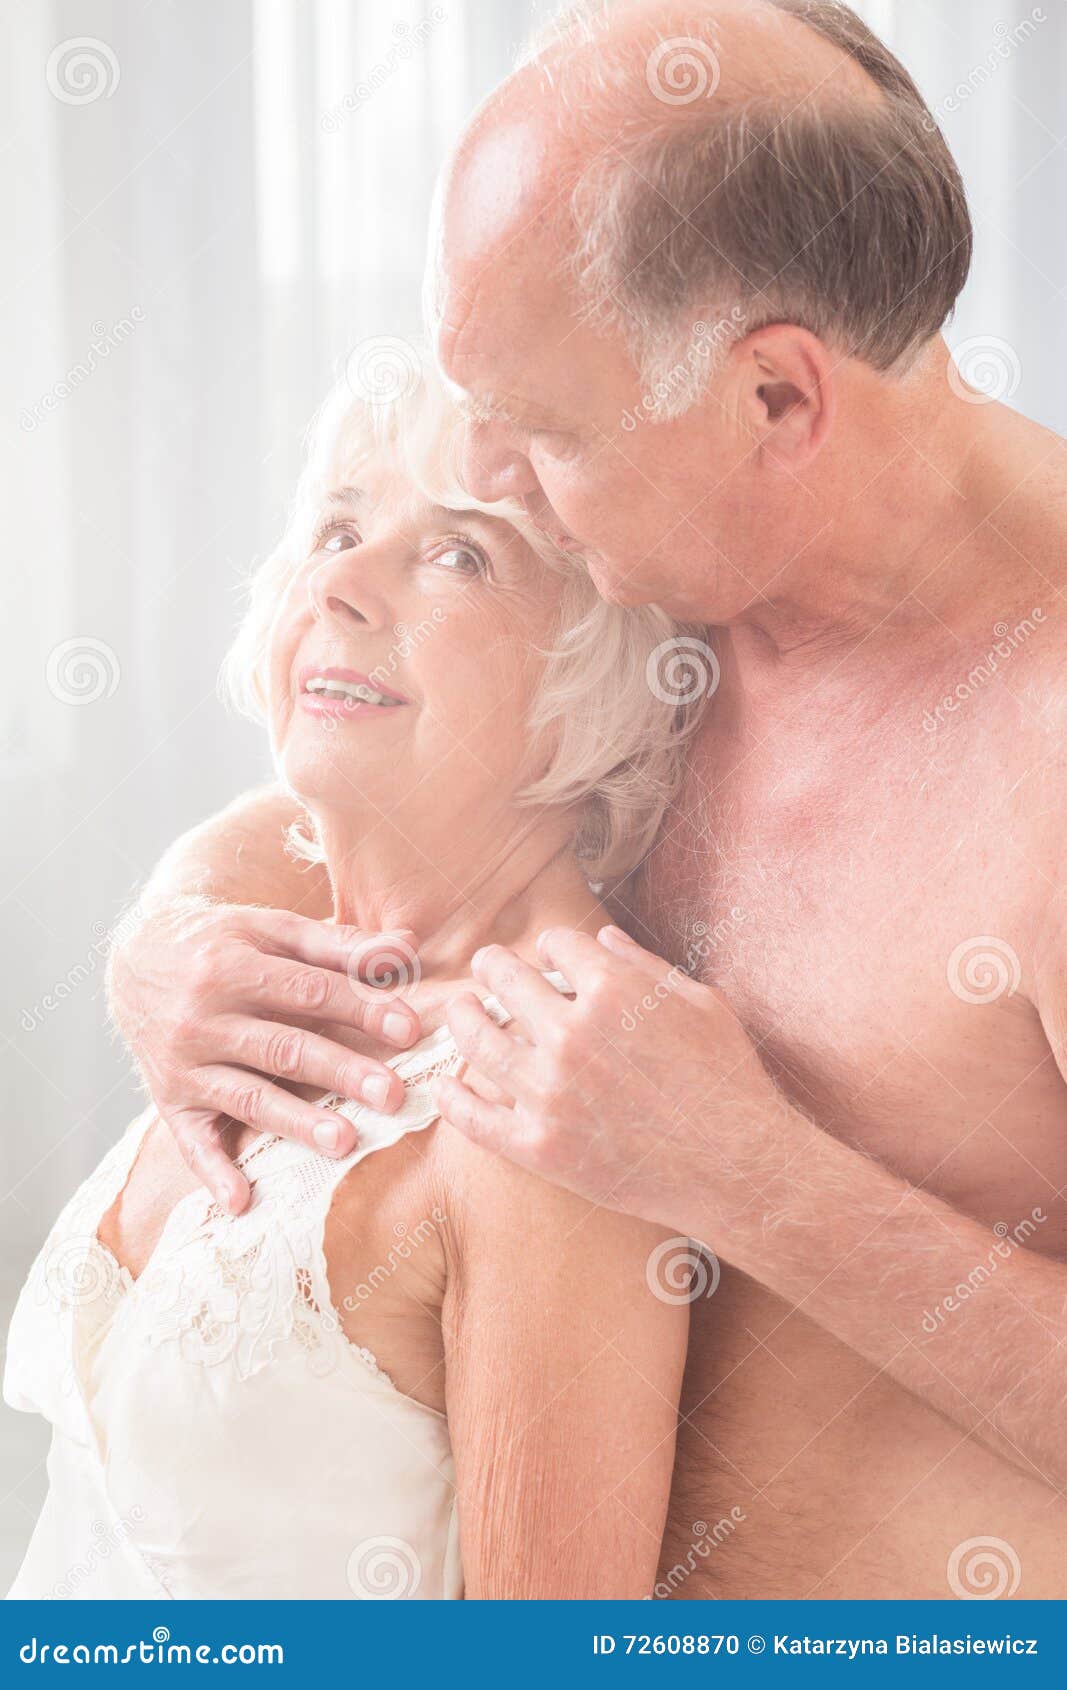 We re not too old for sex stock photo image